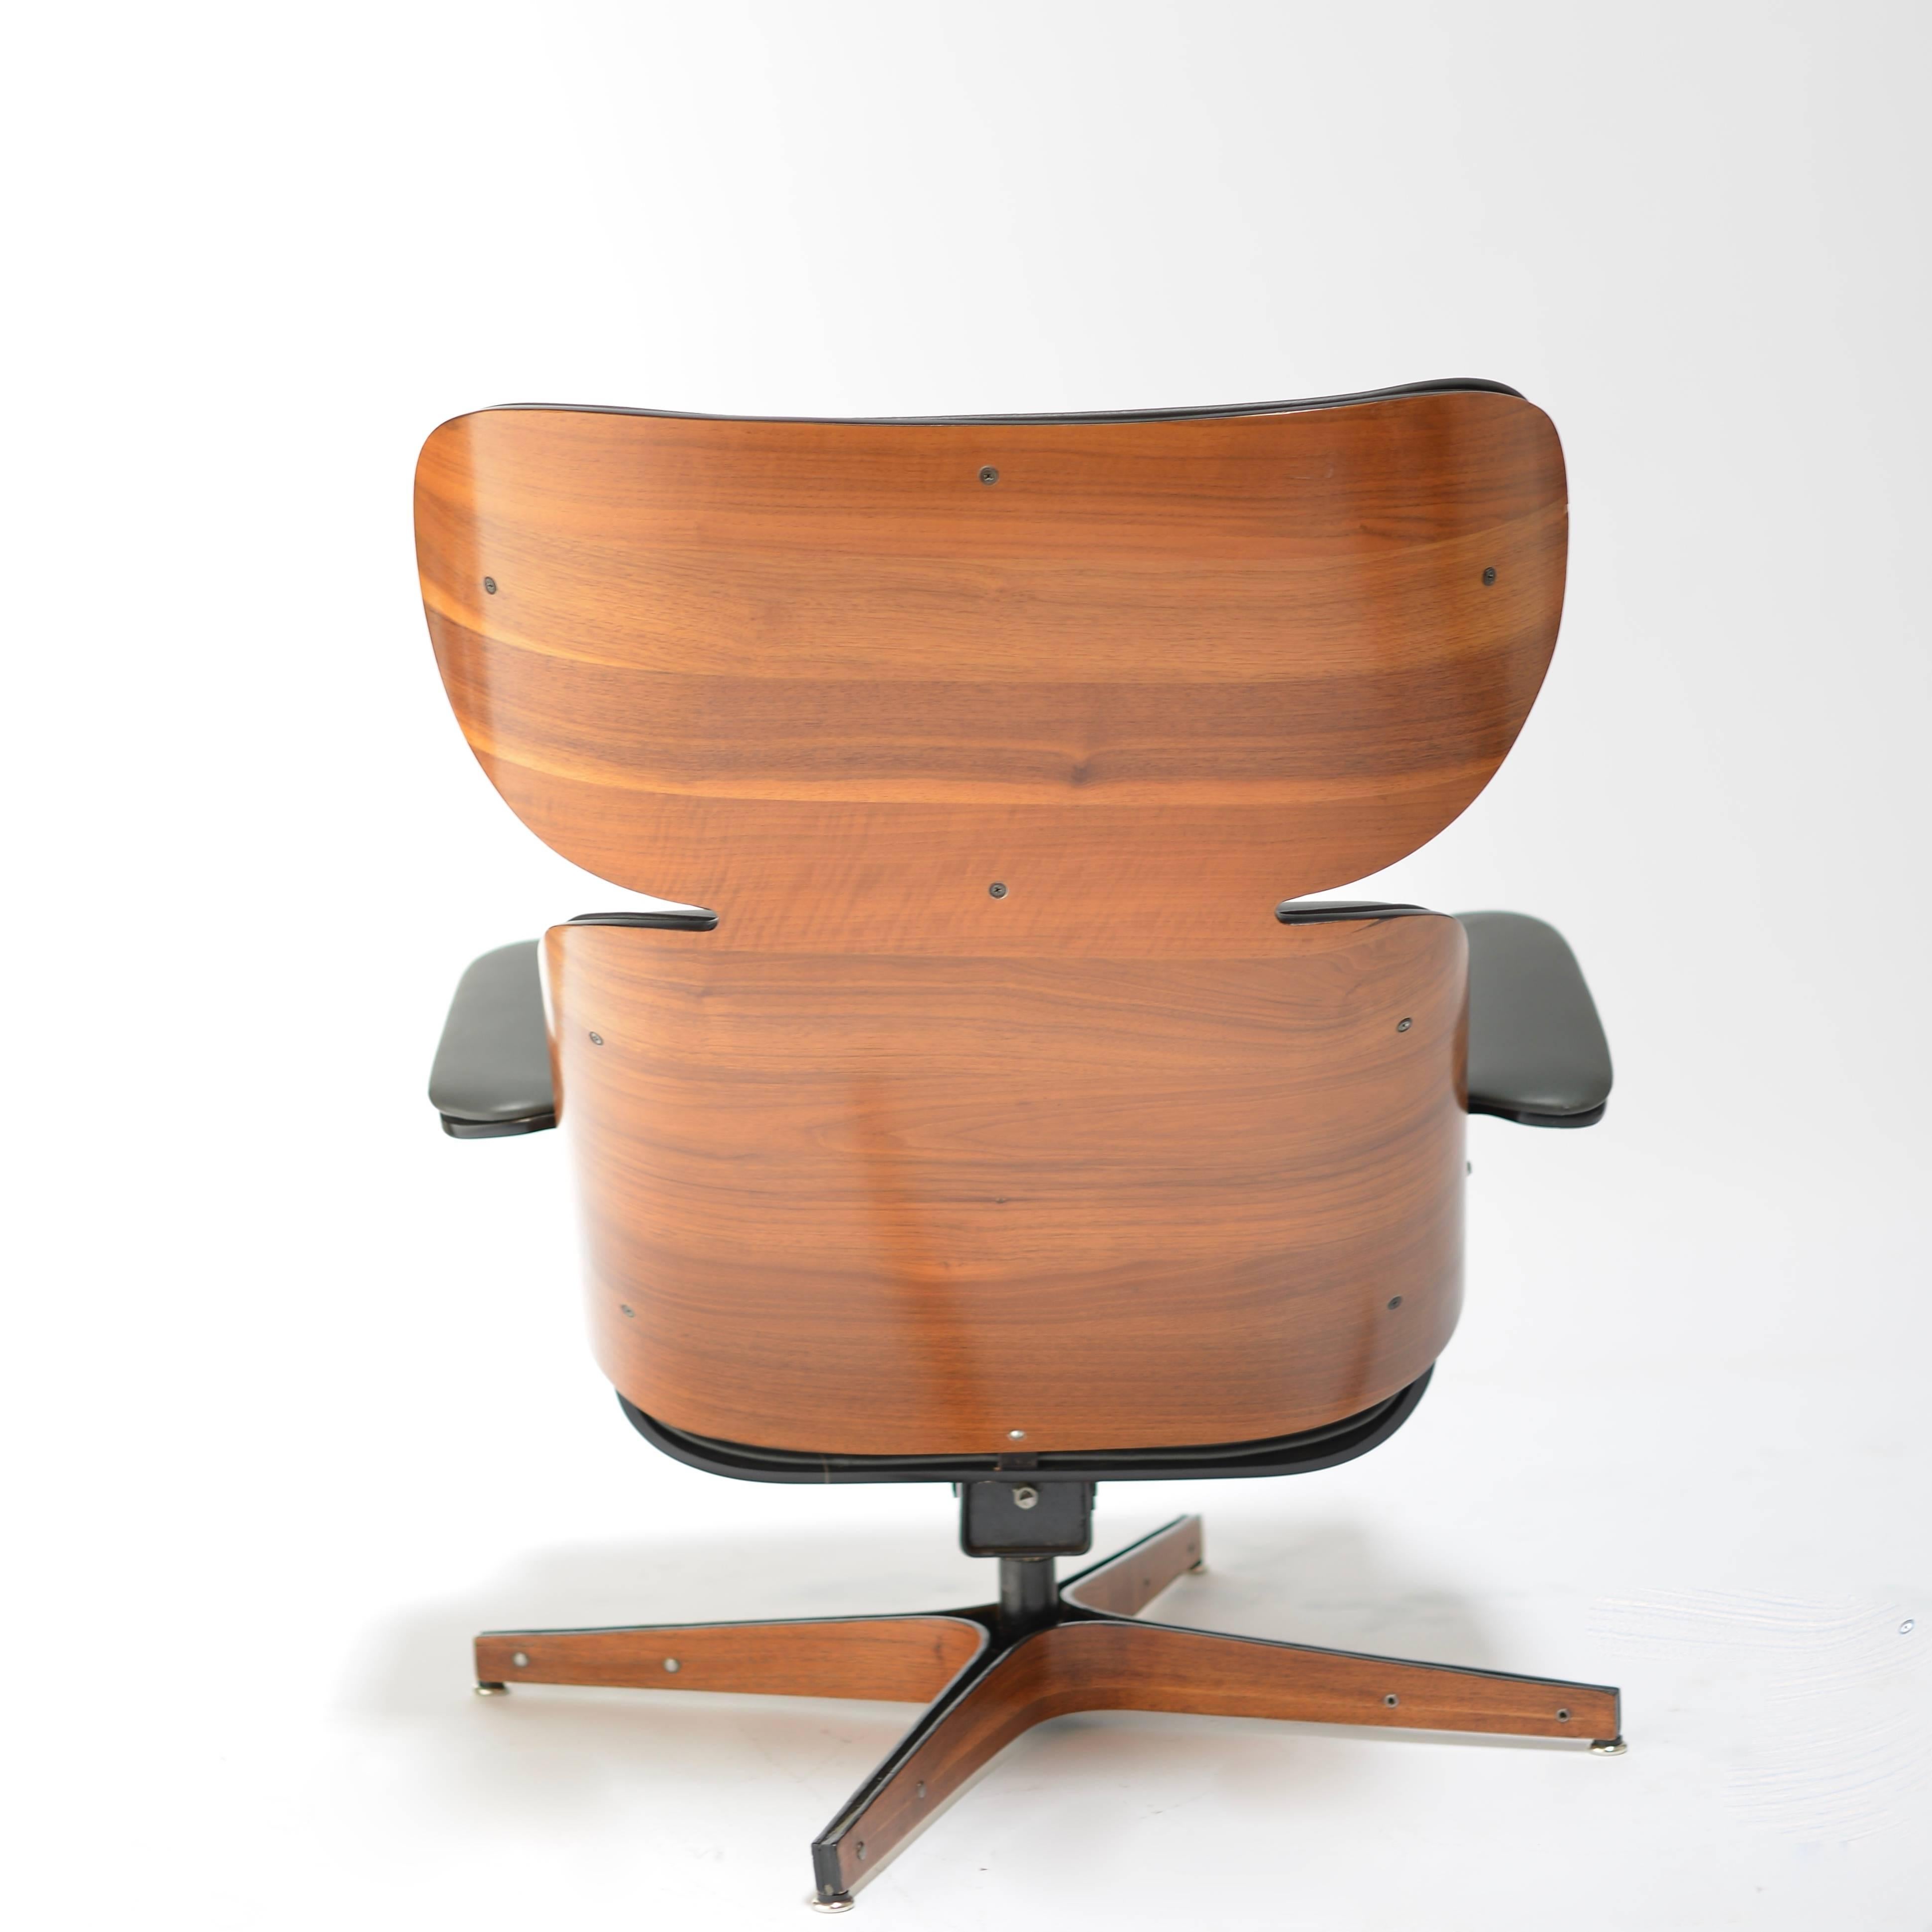 Faux Leather Mr. Chair by George Mulhauser for Plycraft